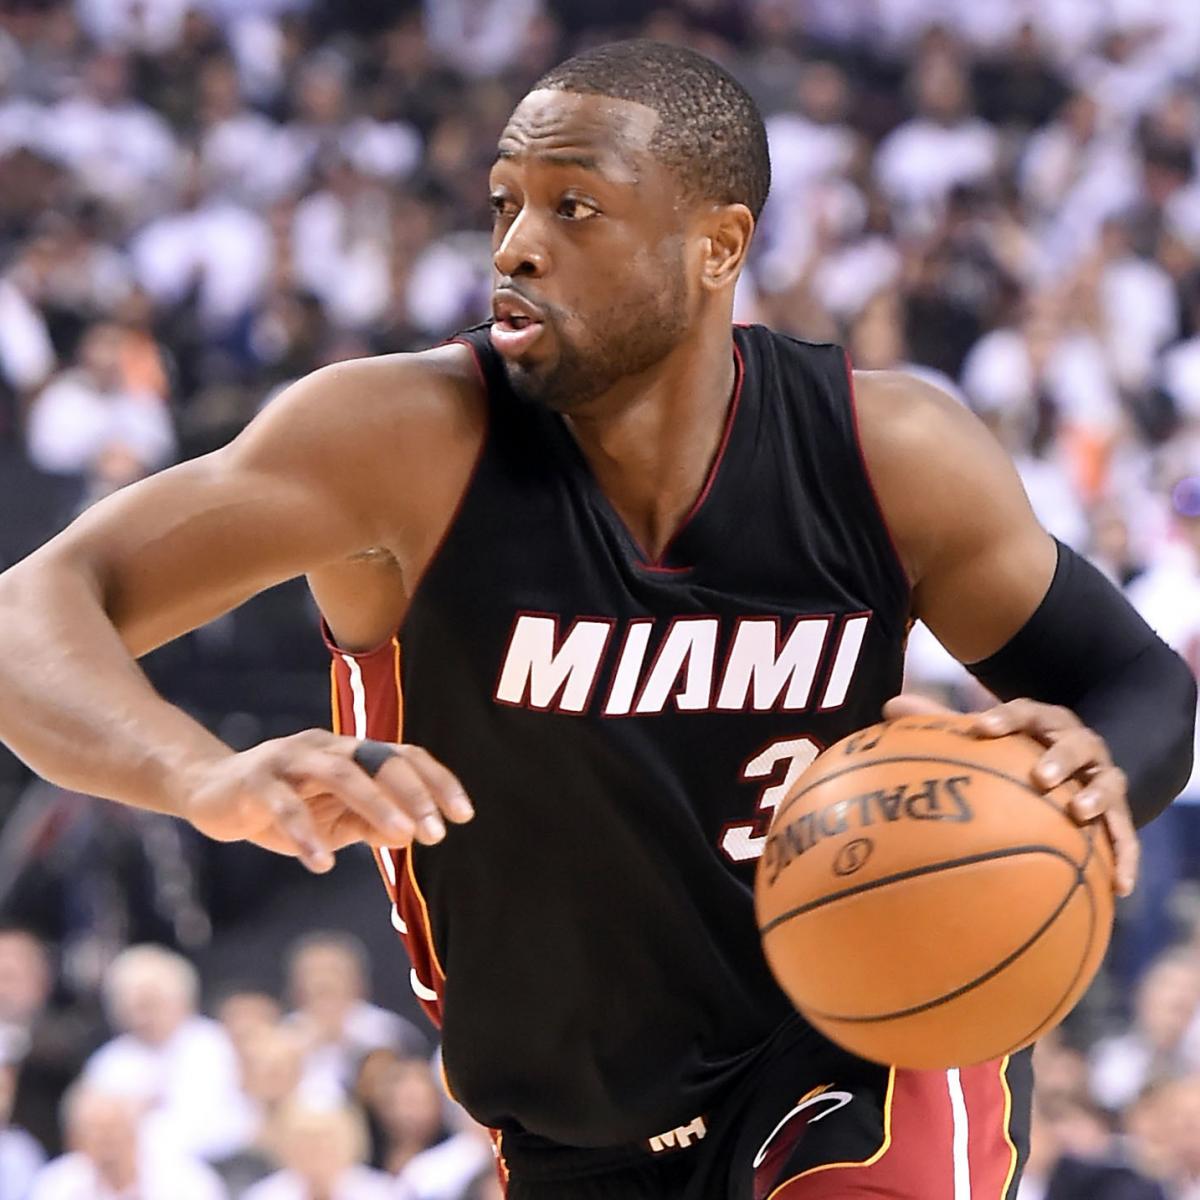 Toronto Raptors Vs Miami Heat Live Score Analysis For Game 3 Bleacher Report Latest News Videos And Highlights